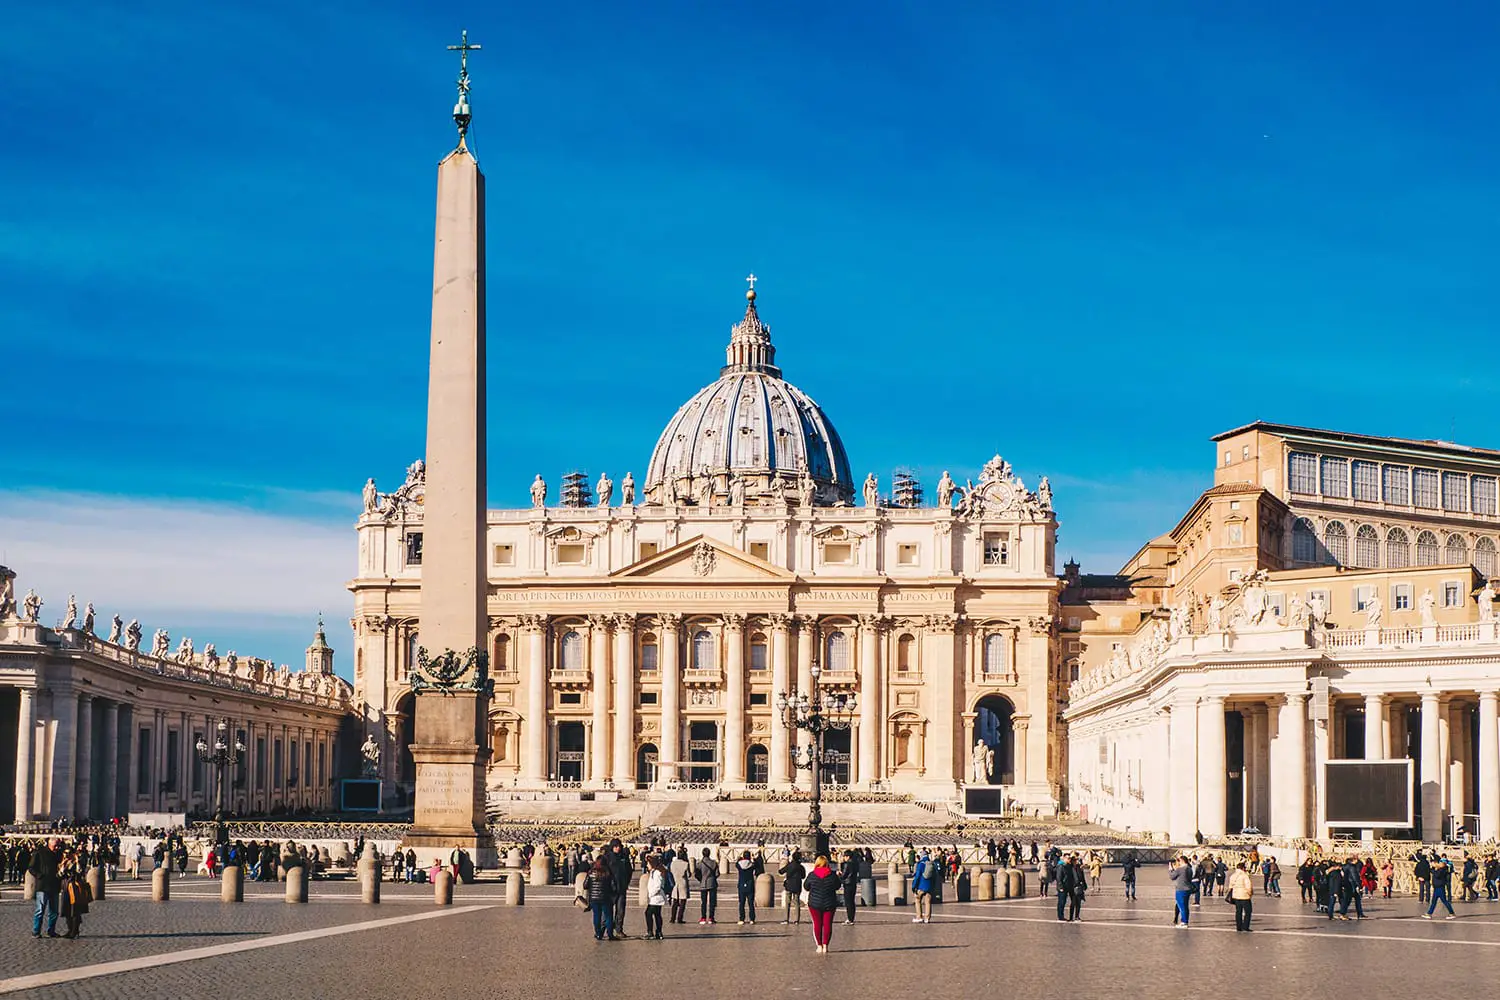 St. Peter's square and Saint Peter's Basilica in the Vatican City in Rome, Italy